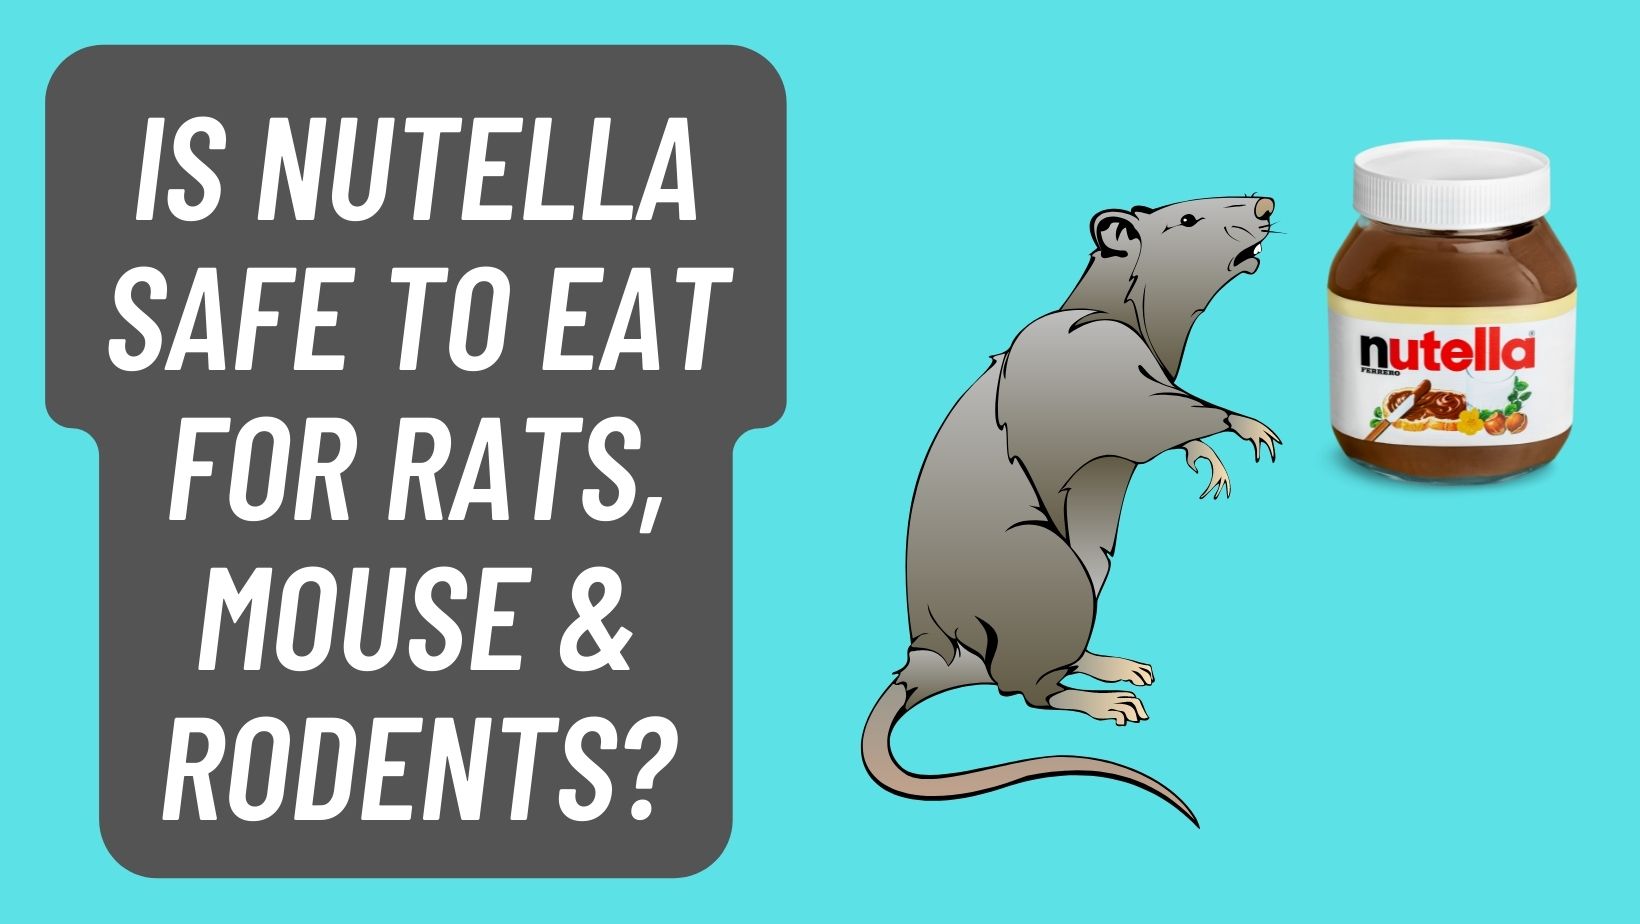 Is Nutella Safe to Eat for Rats, Mouse & Rodents?